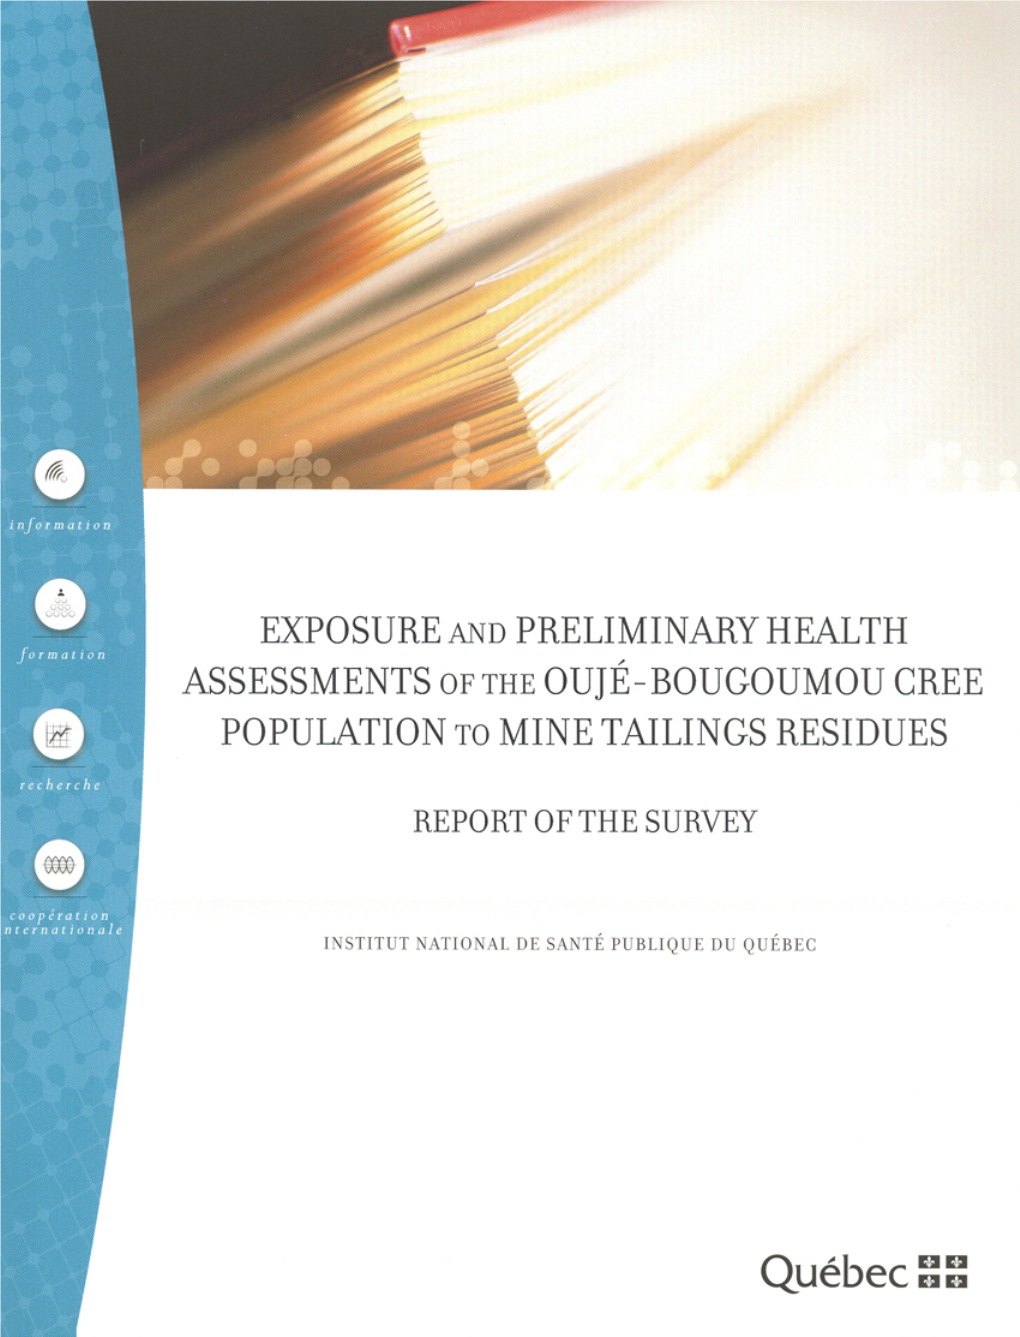 Exposure to Mine Tailings Residues and Preliminary Health